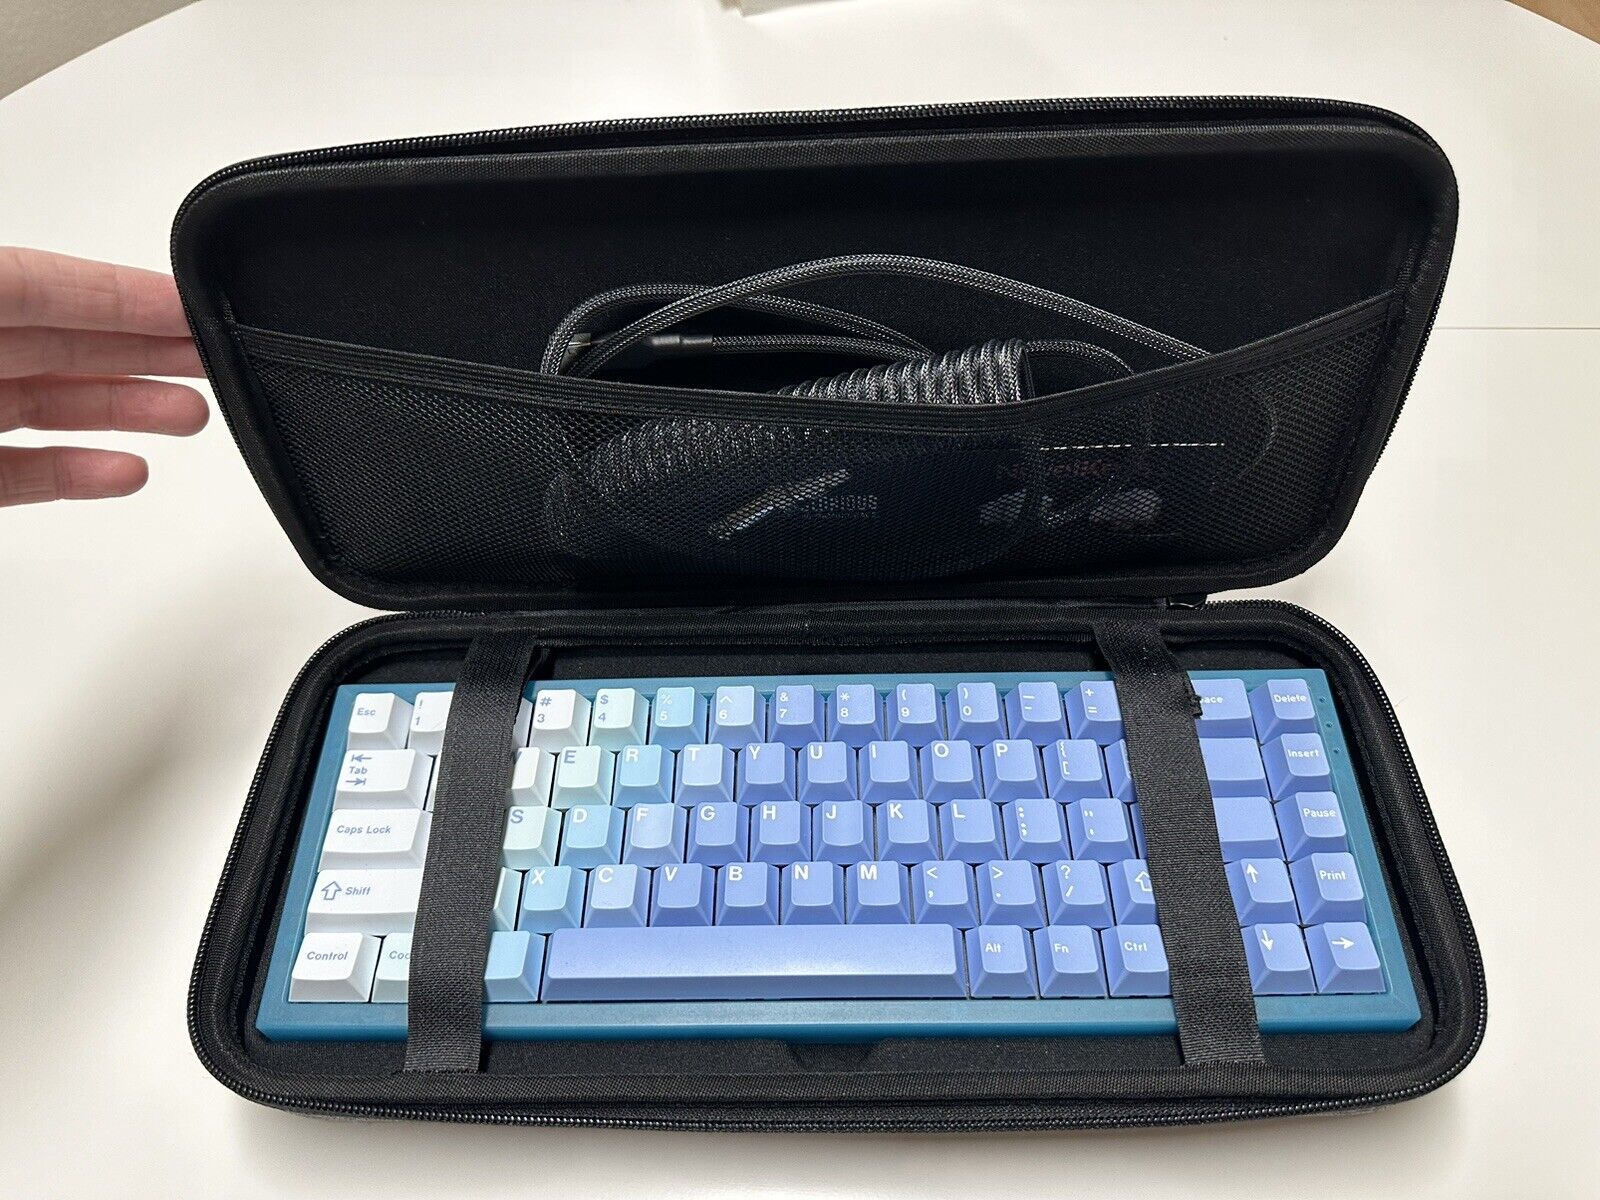 NK65 Entry Edition - Blue Color With Linear switches